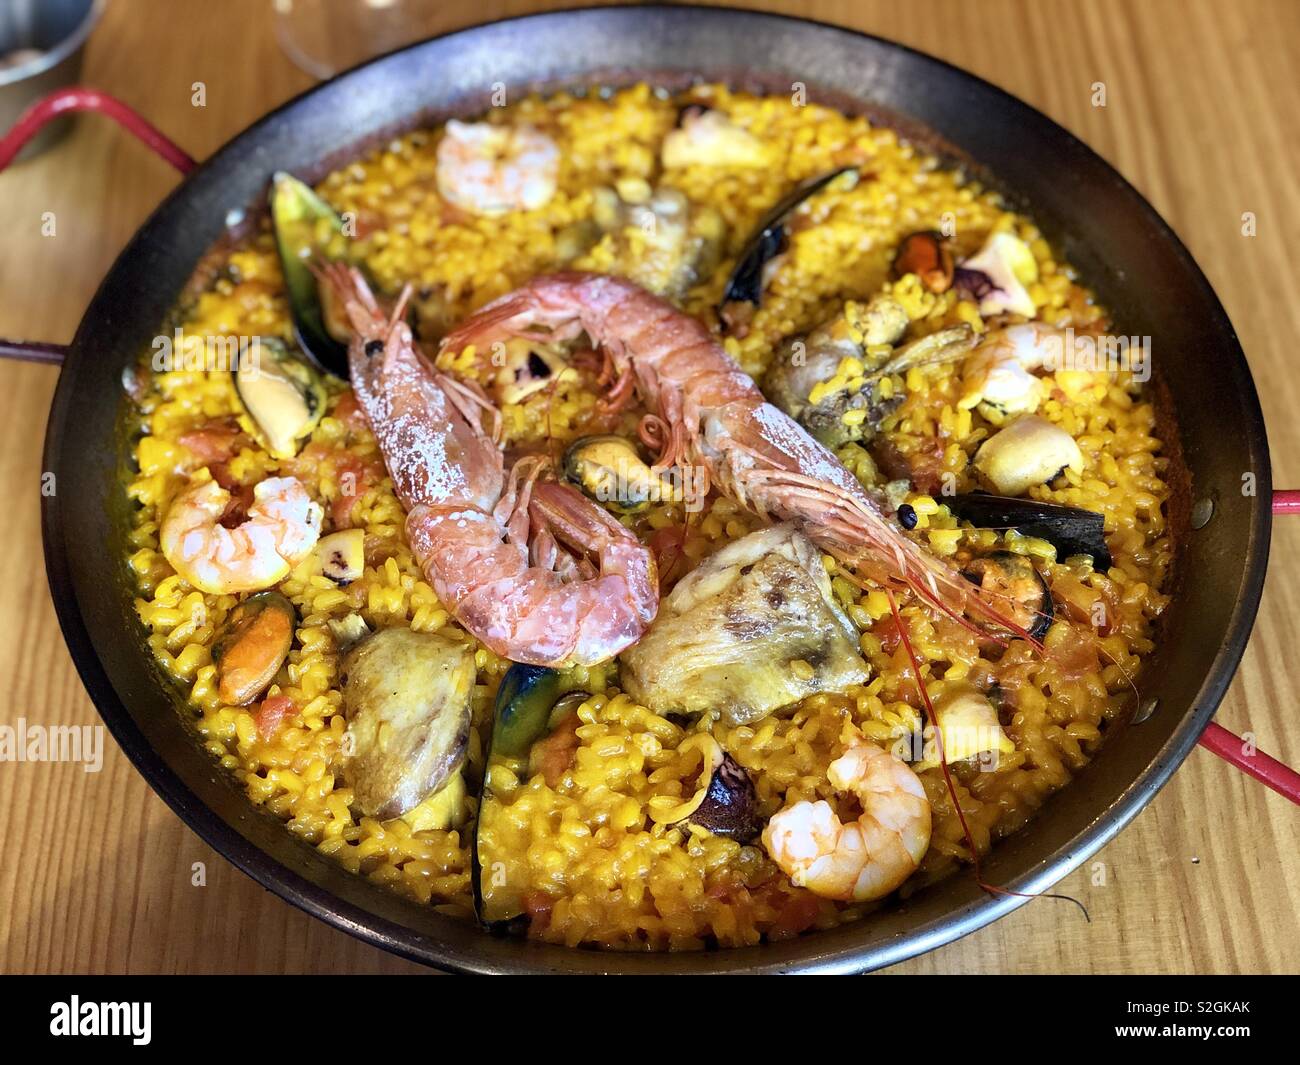 Big Wok Pan of Spanish Seafood Paella with Mussels, Shrimps and Vegetables  Stock Image - Image of fresh, green: 157899027